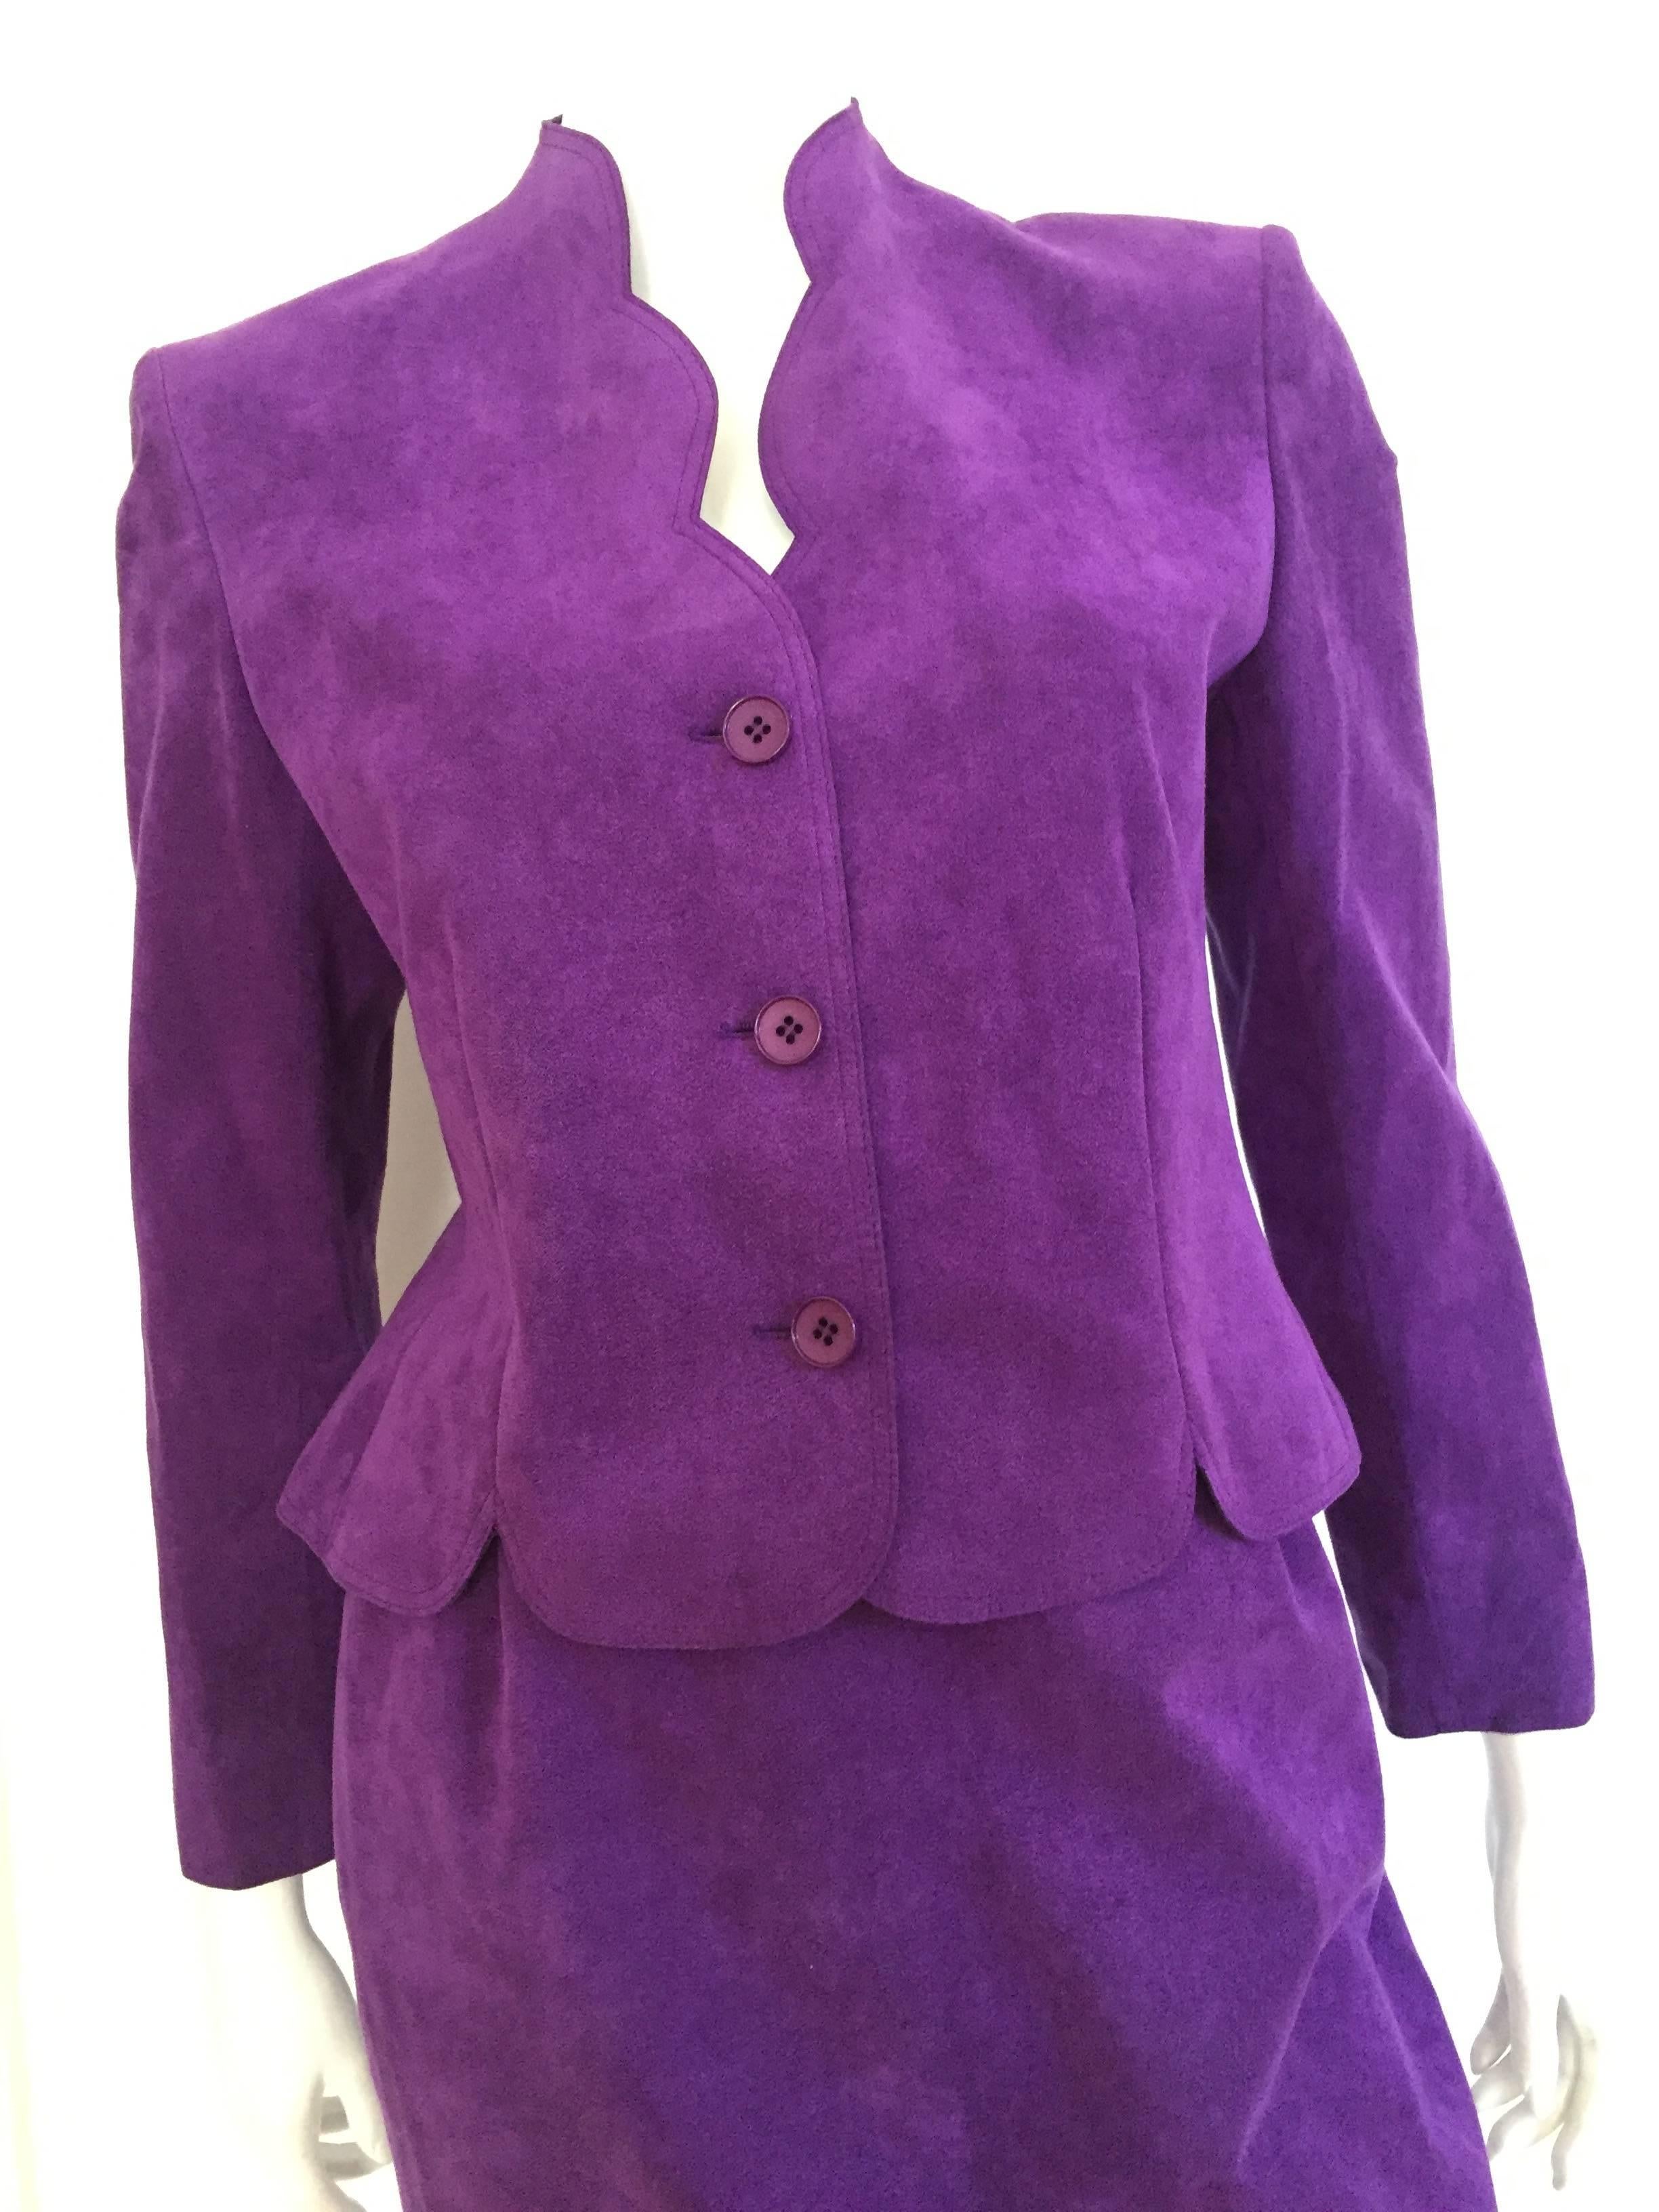 Lilli Ann Petite 1970s ultra suede violet jacket & skirt is a size 6 but please see & use the measurements below to properly measure your lovely body. Nothing says 'Hello 70's' than ultra suede ! Jet setters adored this fabric back in the 70s